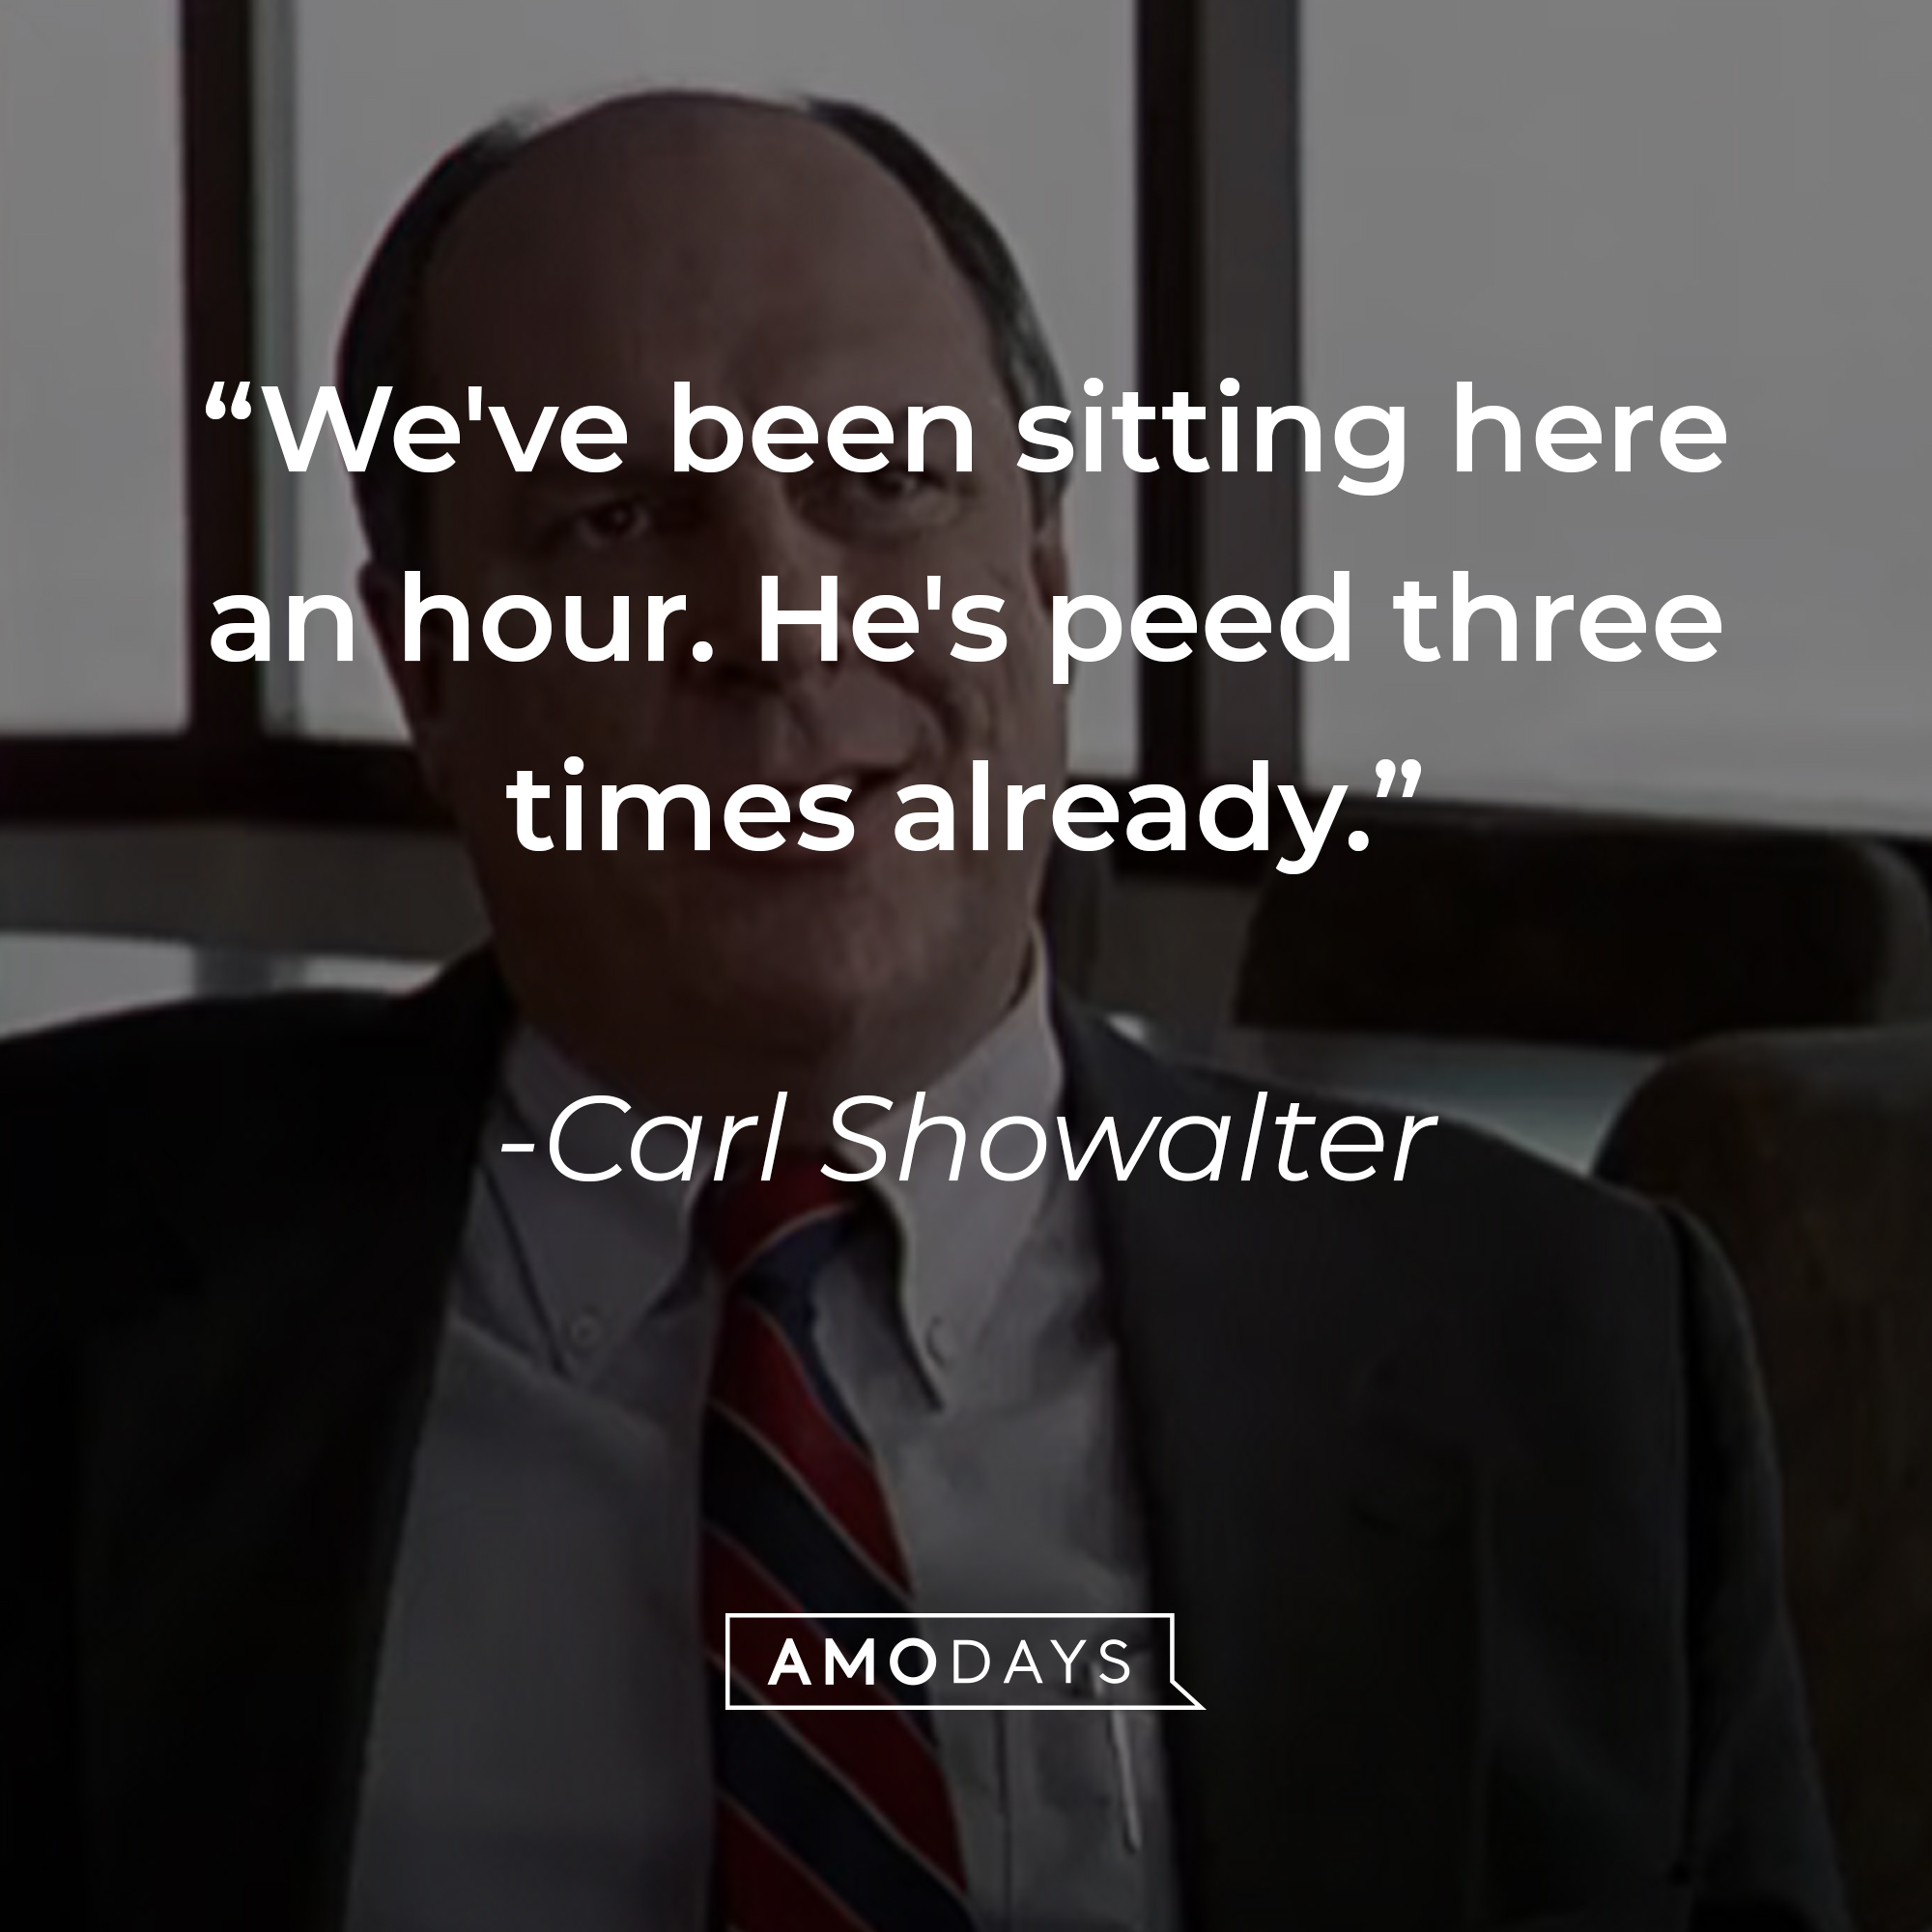 Carl Showalter's quote: "We've been sitting here an hour. He's peed three times already." | Source: youtube.com/MGMStudios